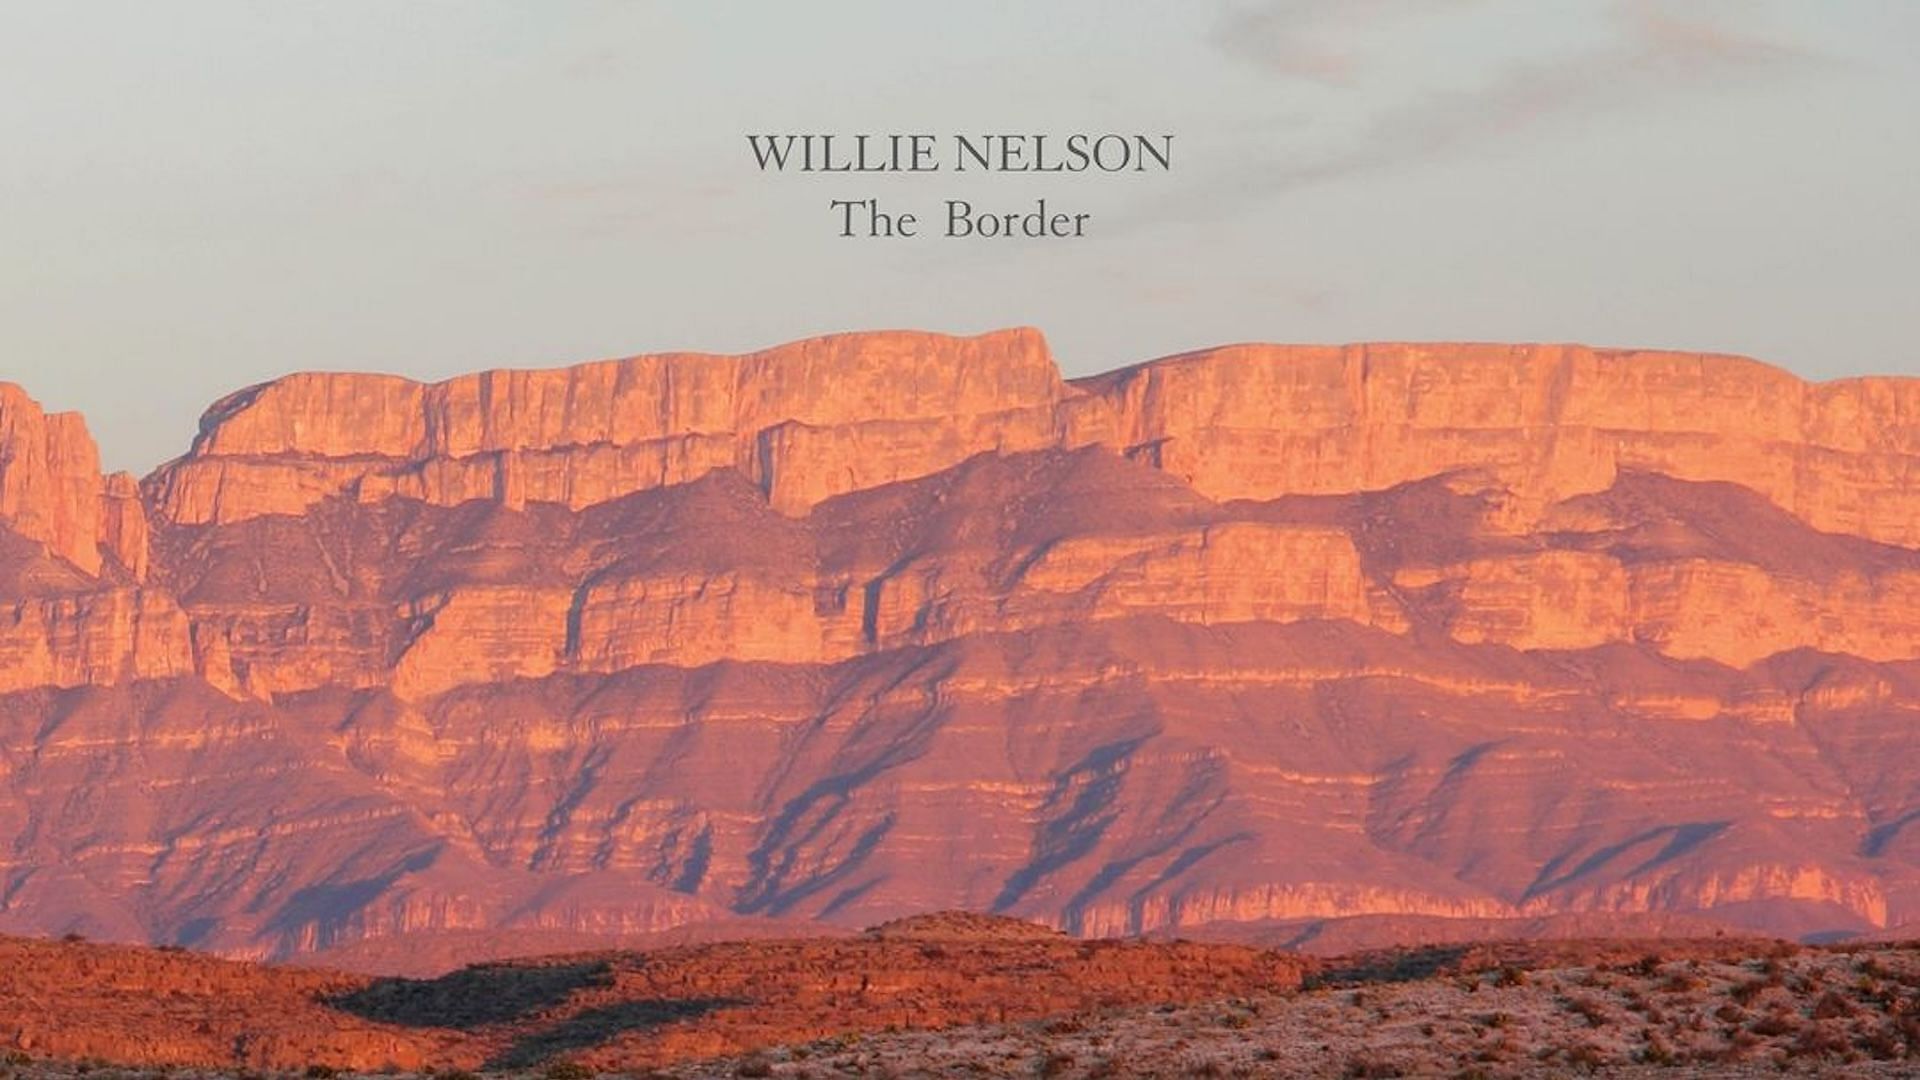 The official album cover for Willie Nelson